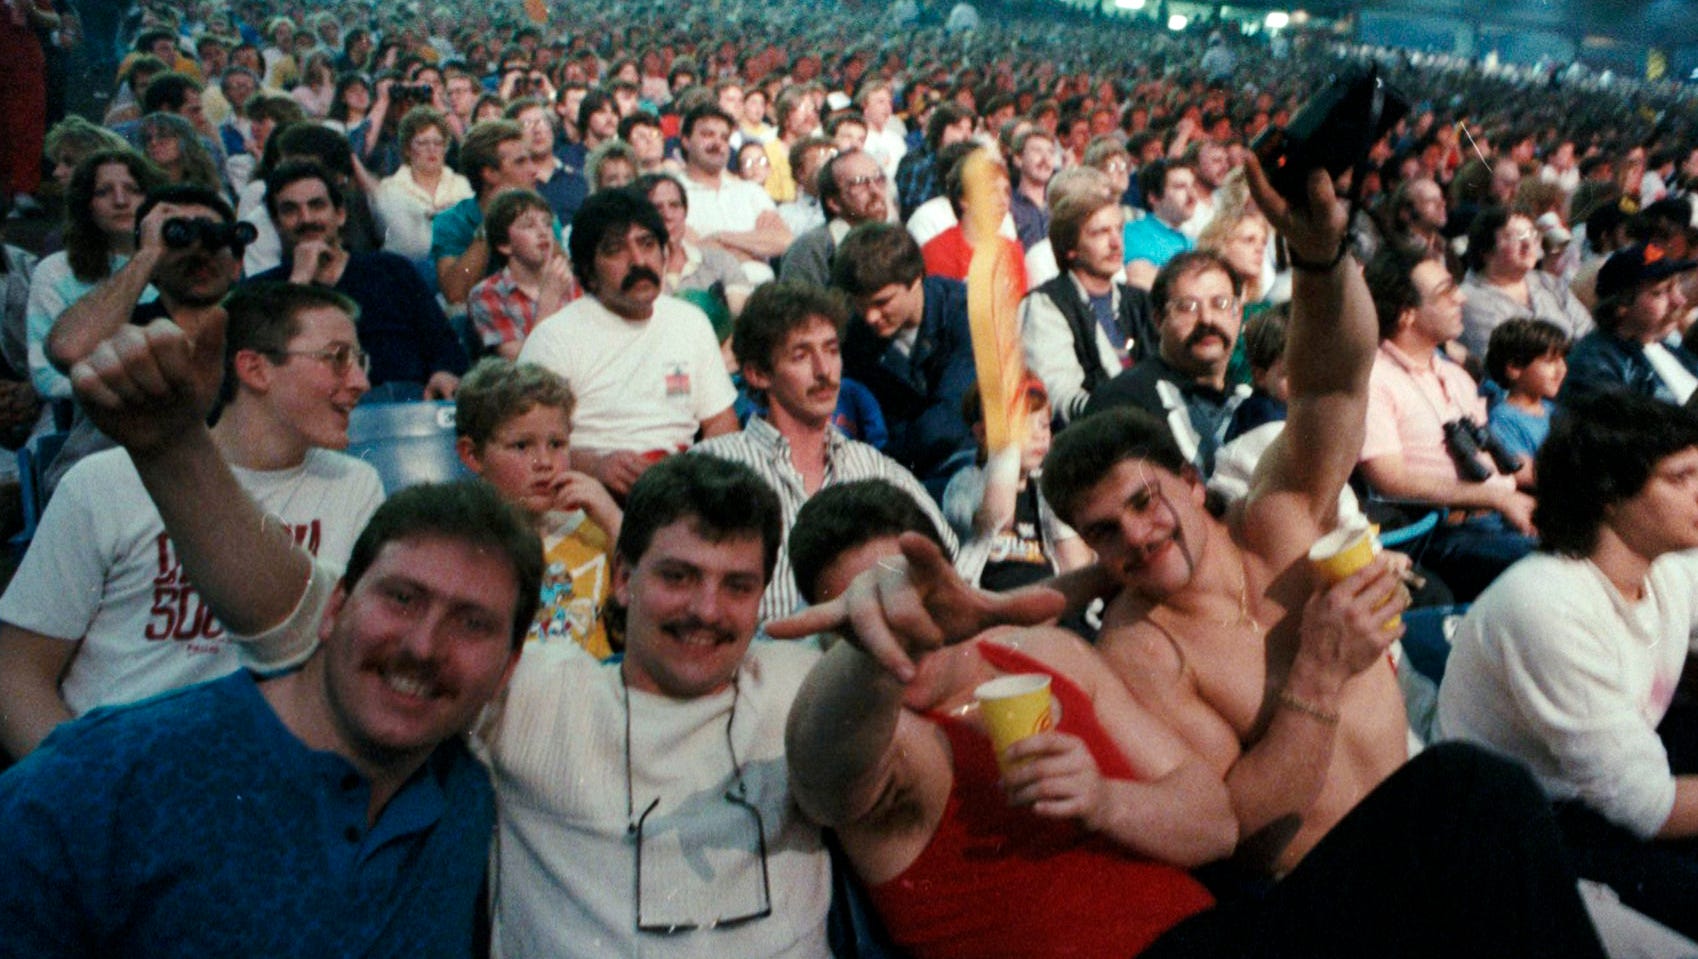 WrestleMania III is considered the day that professional wrestling went national, and mainstream. Previously, wrestling was a more regional spectacle.